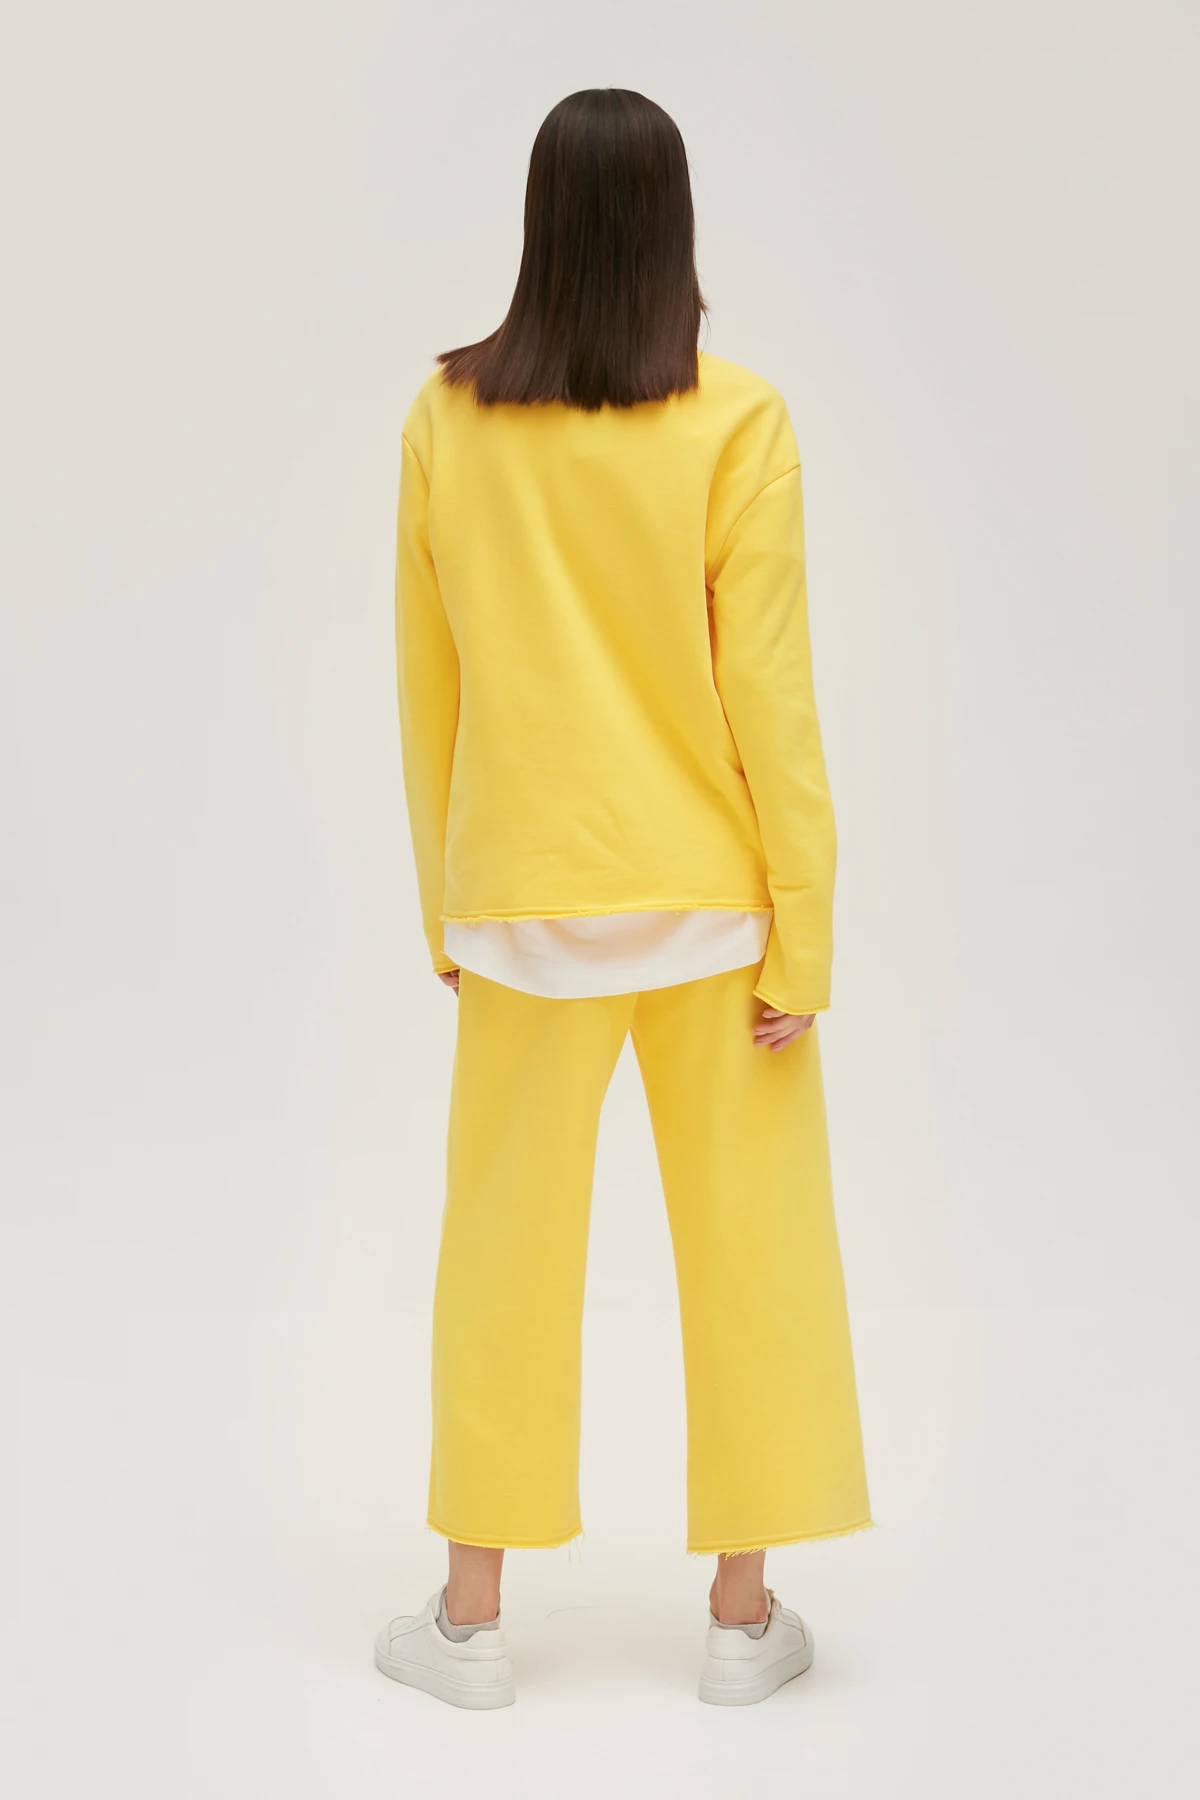 Yellow cropped pants made of knitwear, photo 3